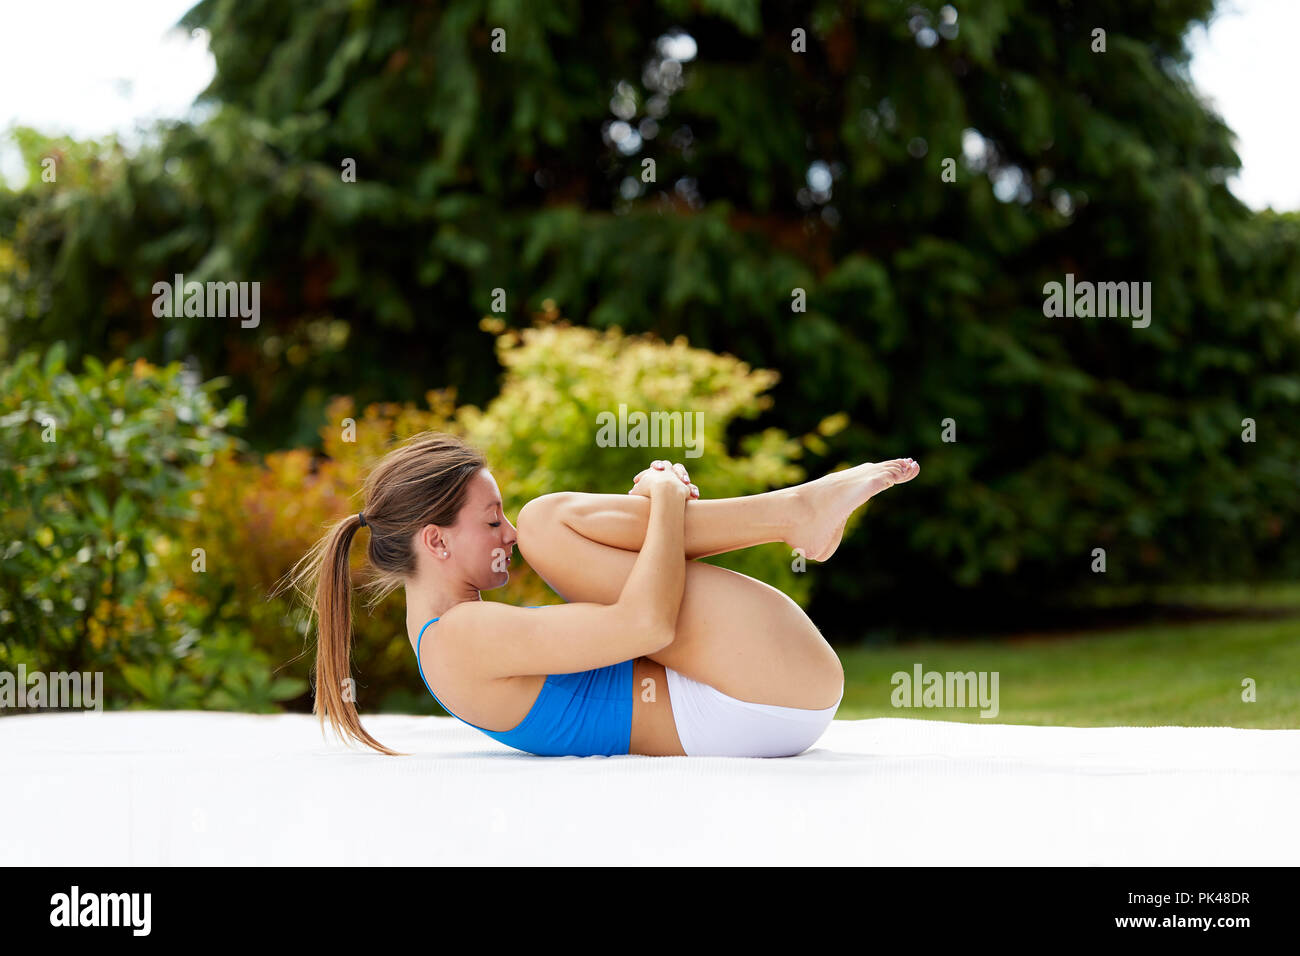 Girl practicing Yoga outdoors Banque D'Images